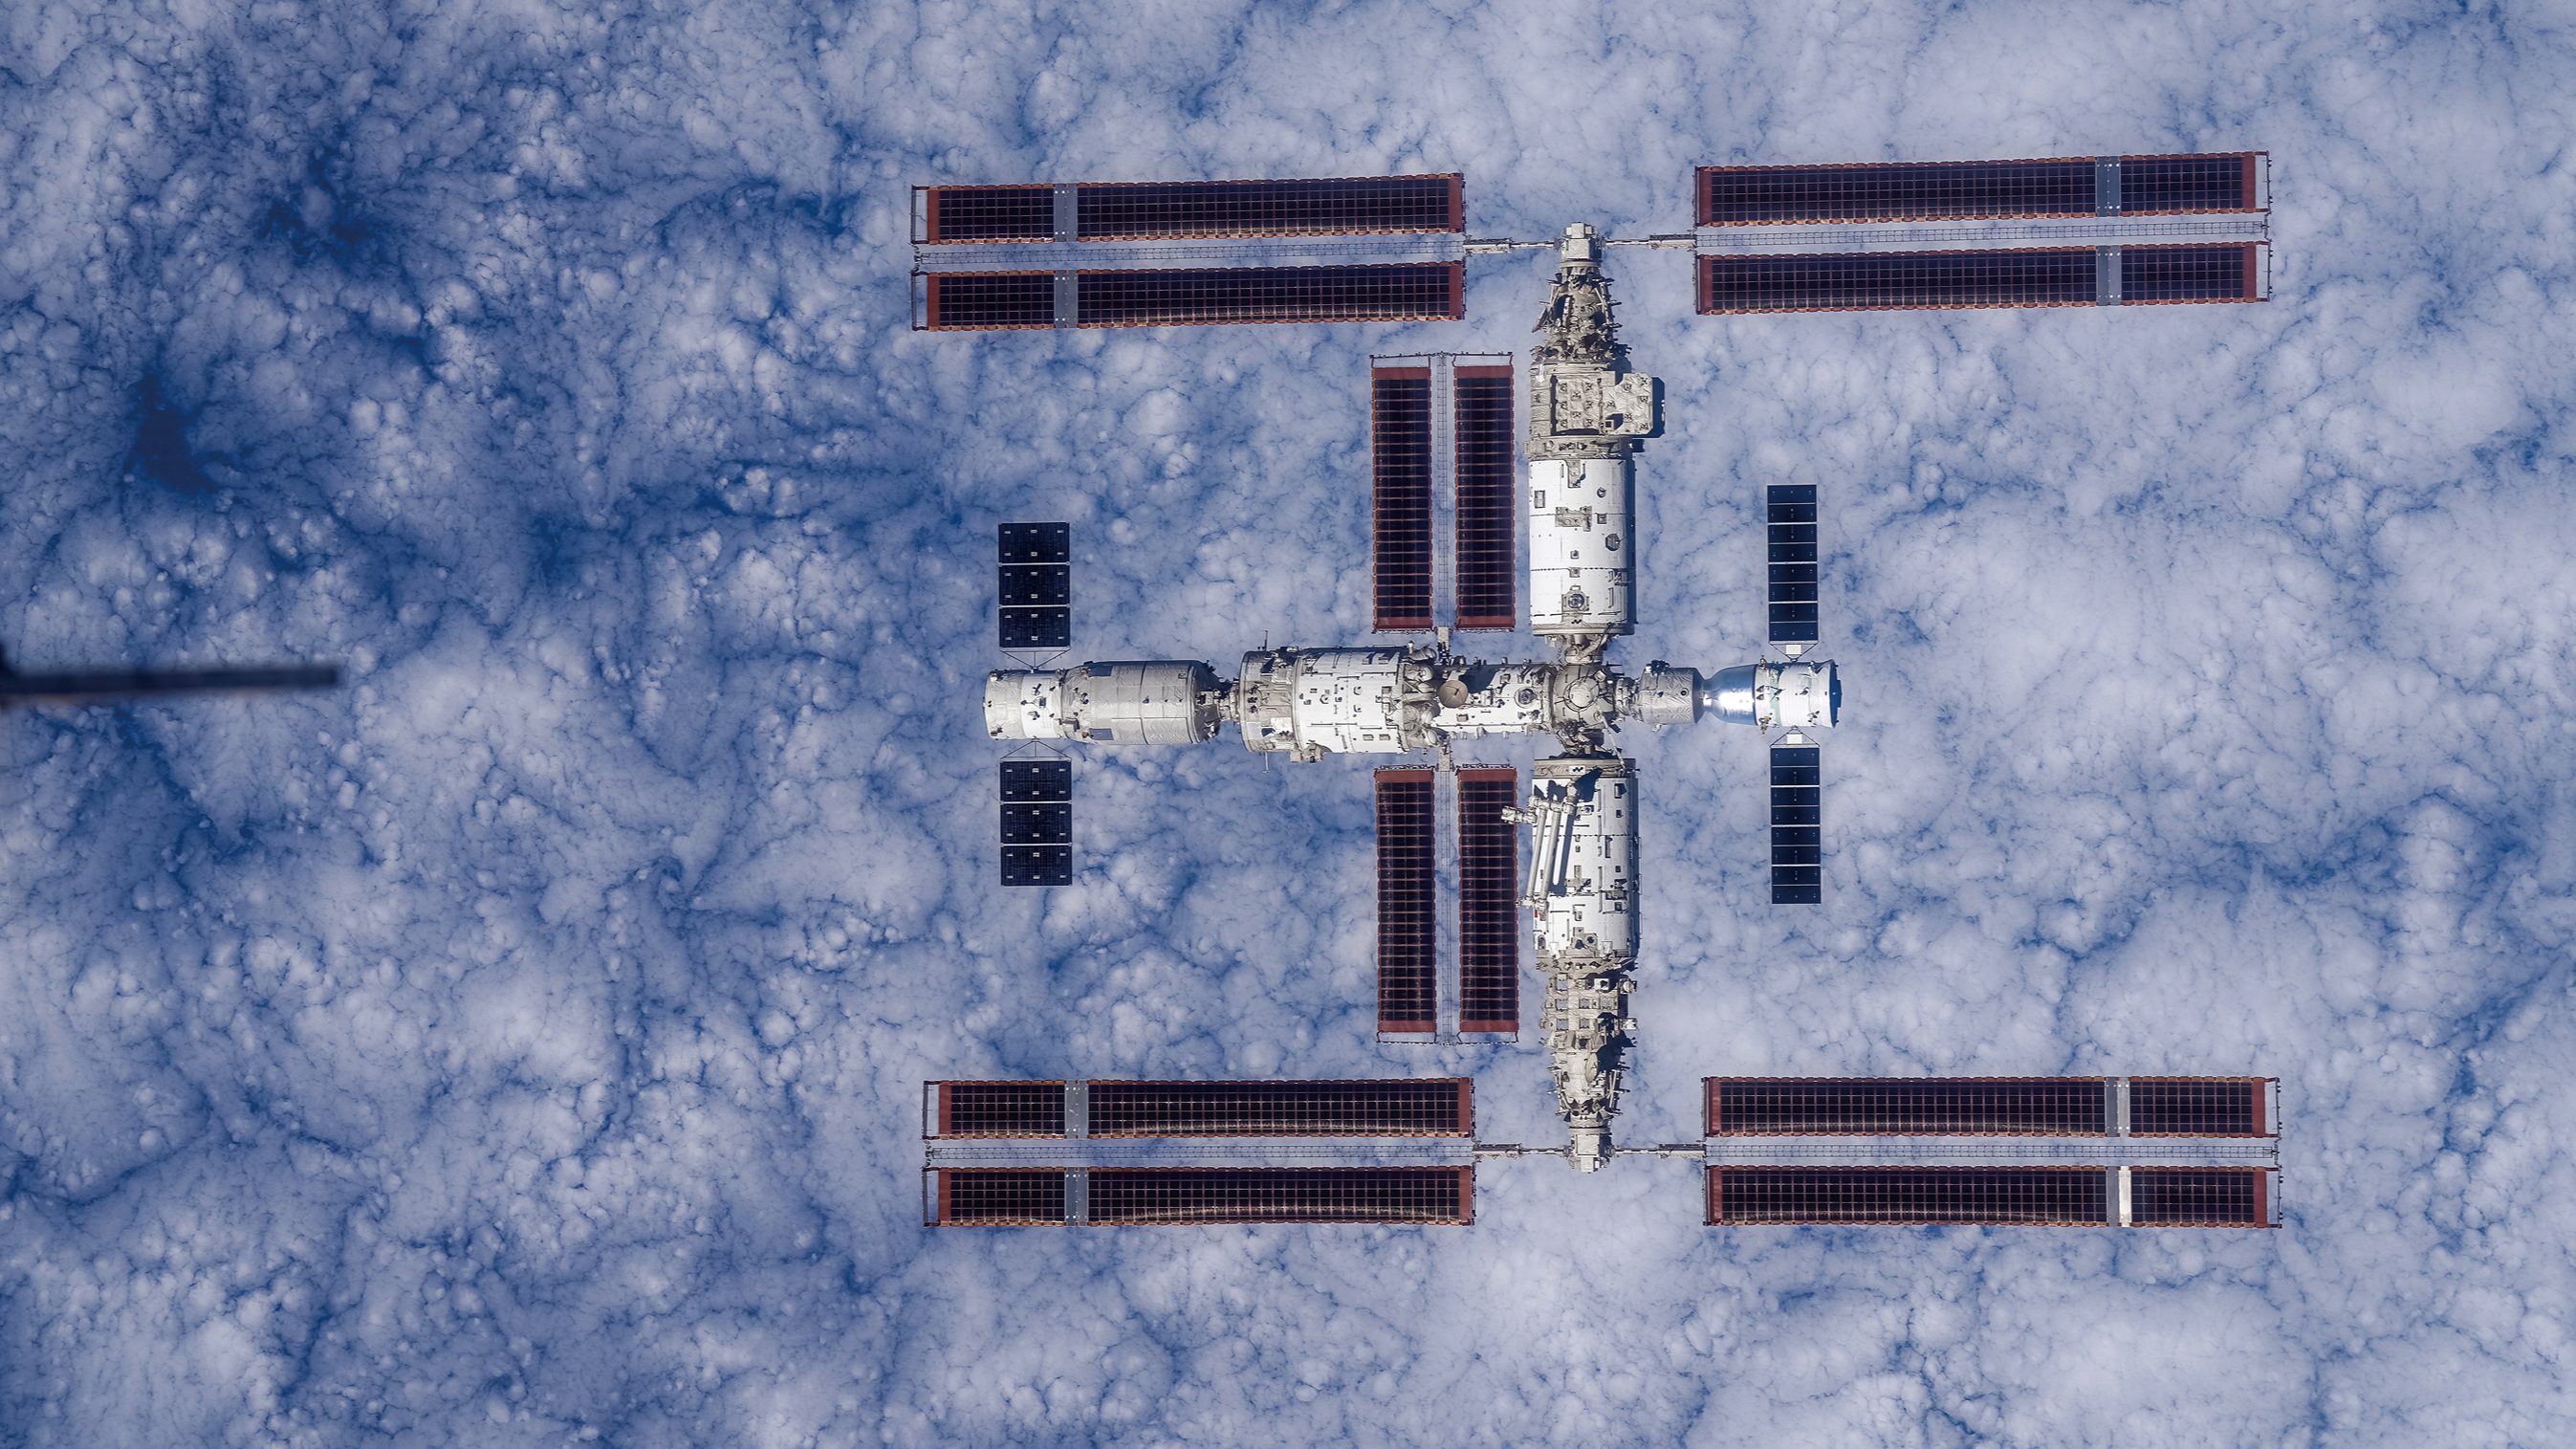 Aerial view of China Space Station. /CMS